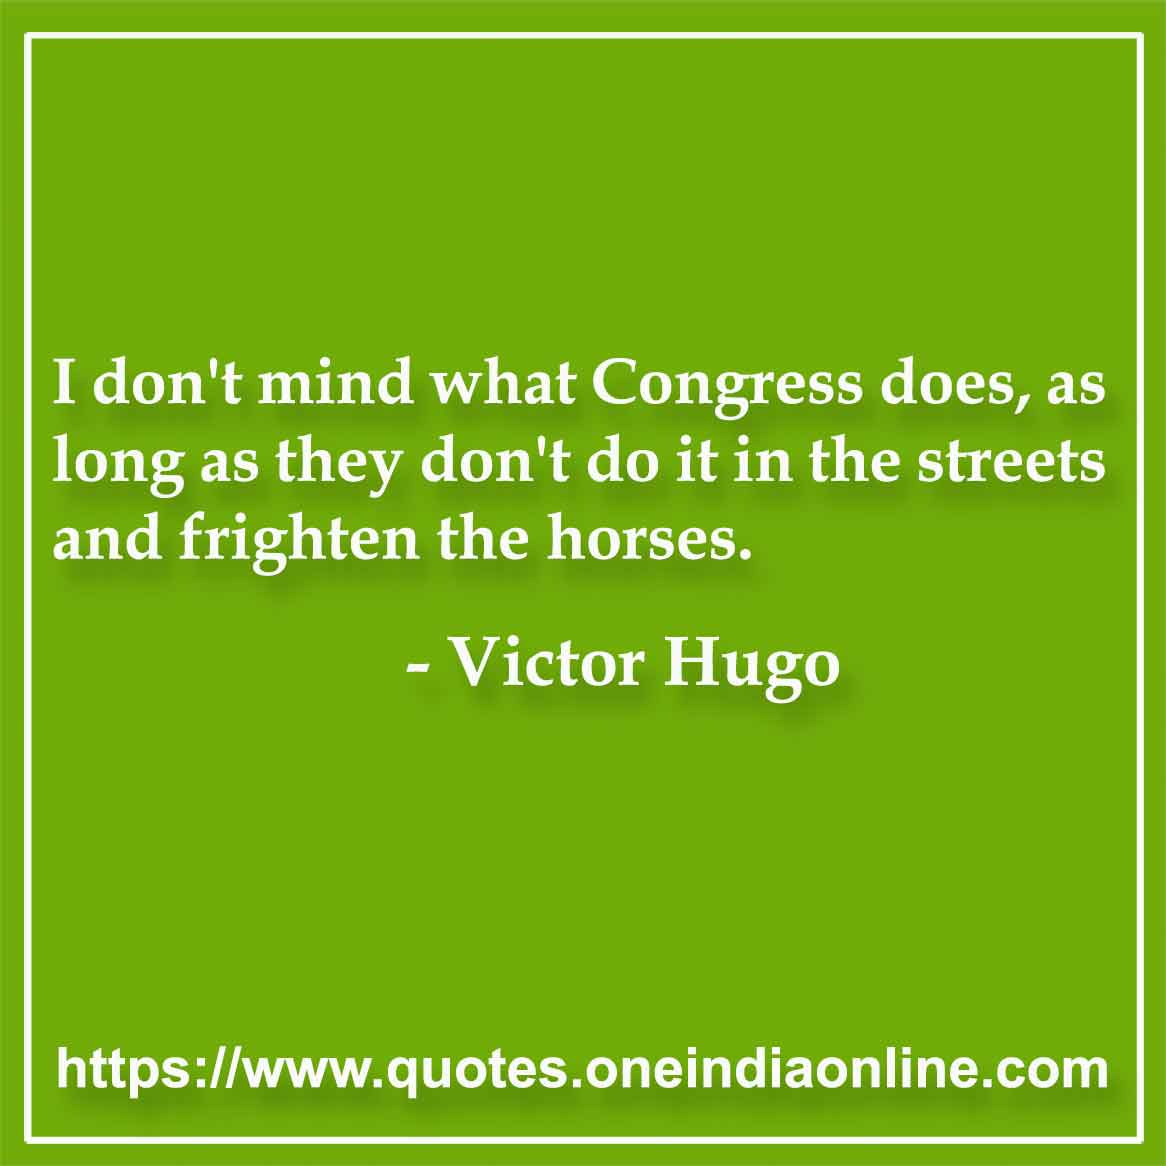 I don't mind what Congress does, as long as they don't do it in the streets and frighten the horses.

- Congress Quotes by Victor Hugo